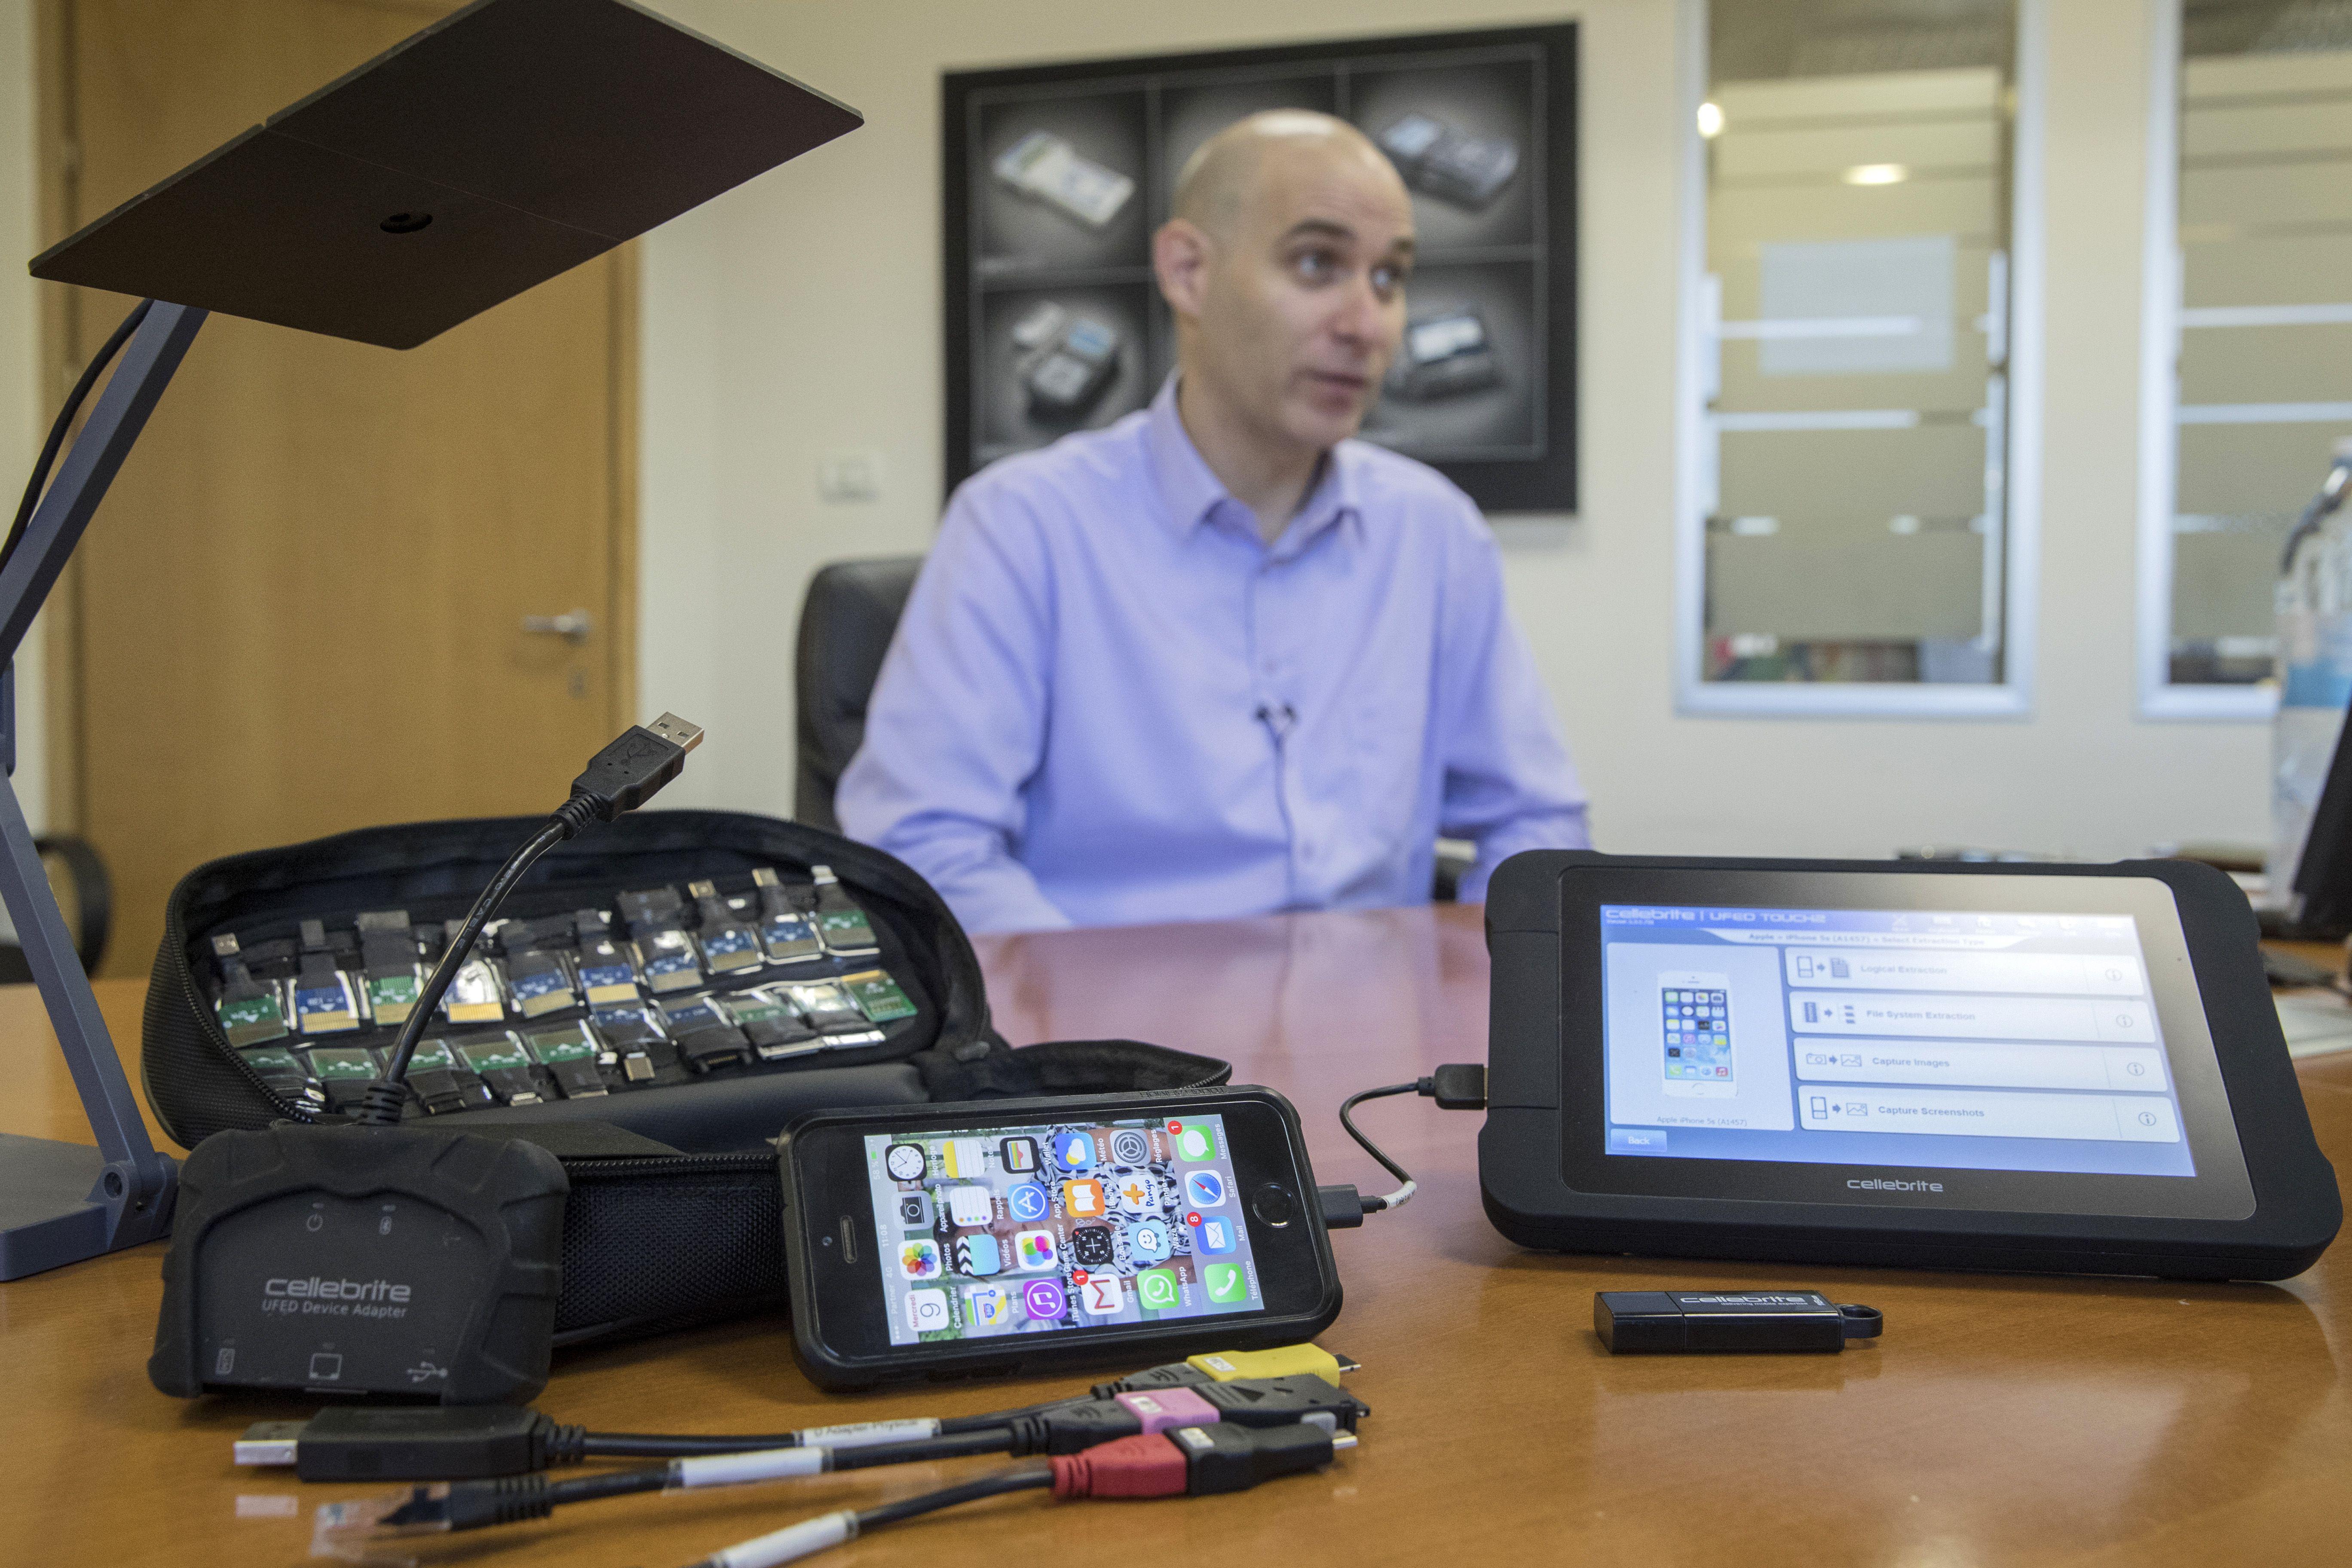 Leeor Ben-Peretz, the executive vice president of the Israeli firm Cellebrite’s technology, shows devices and explains the hacking technology developed by his company.